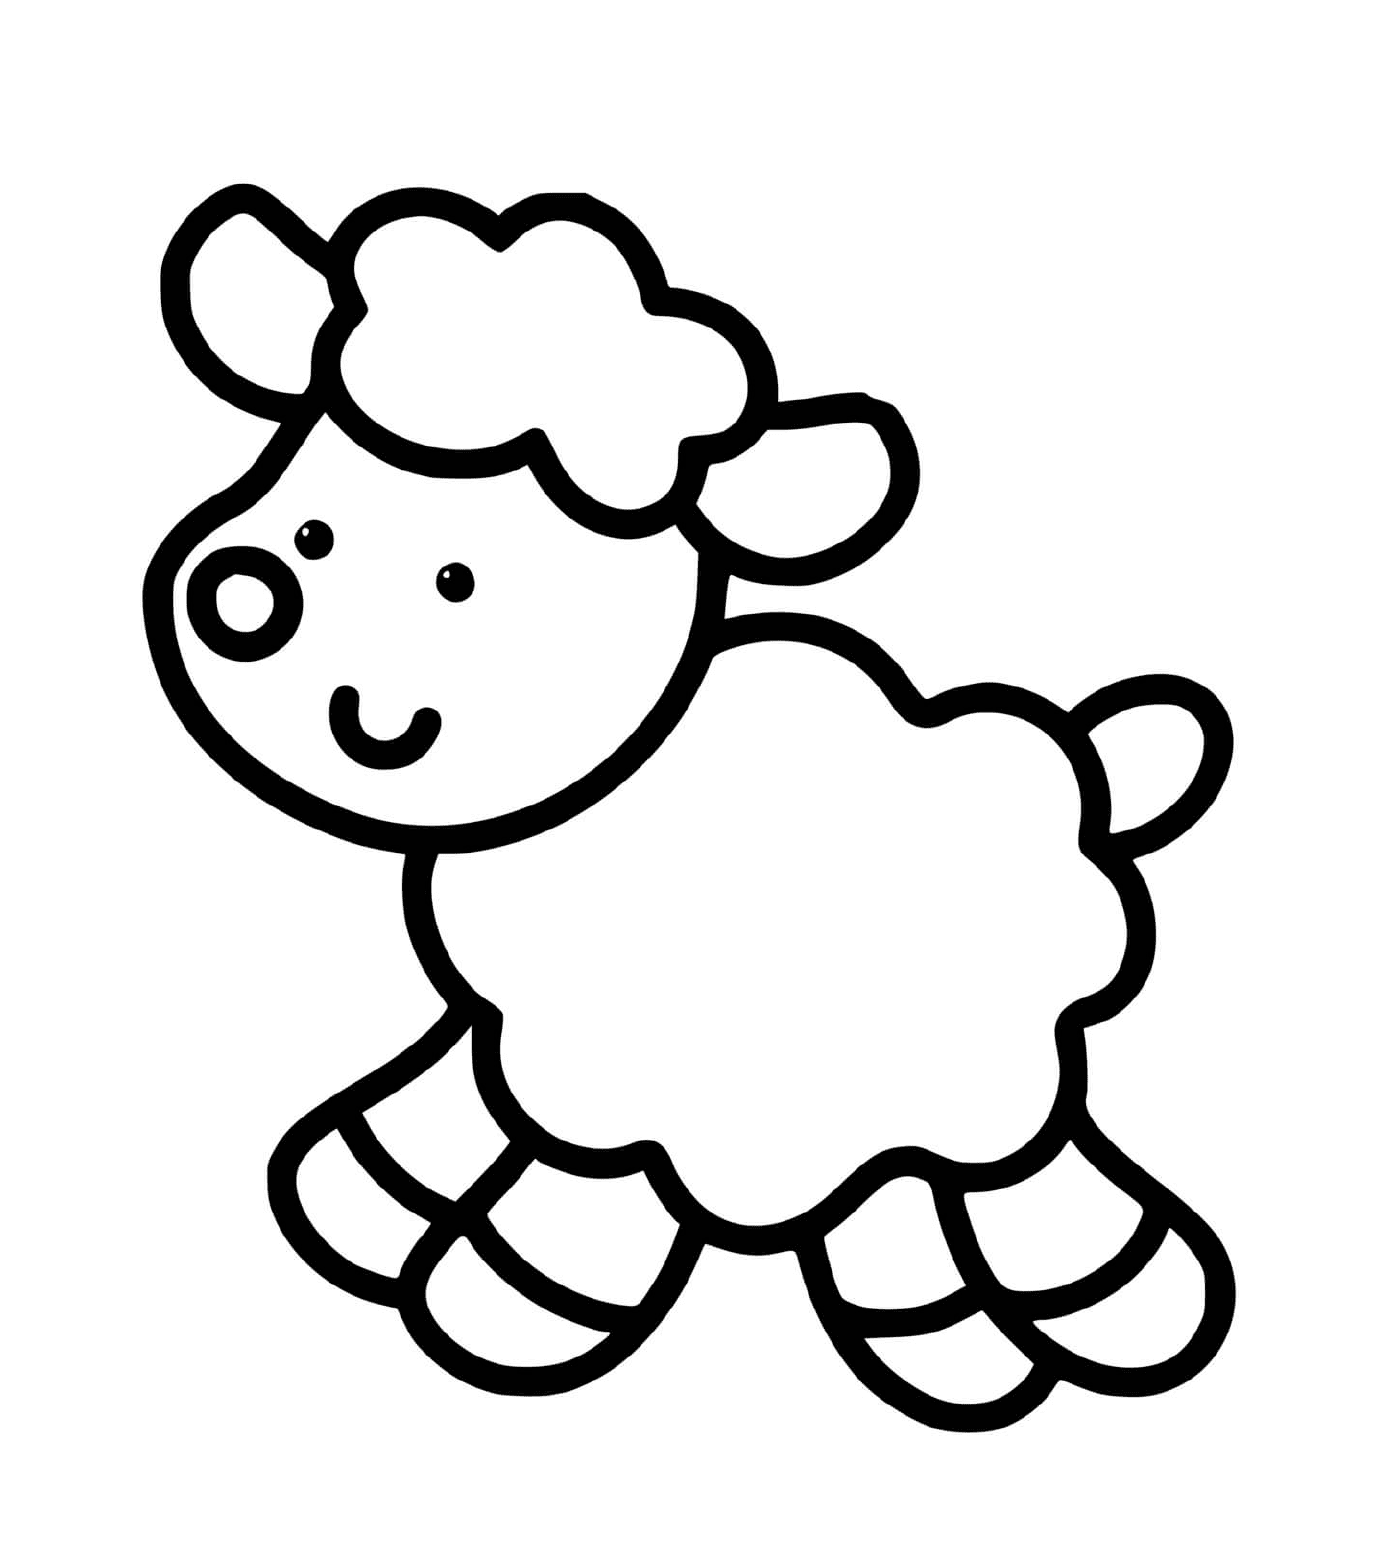  An easy to draw sheep for 2-year-olds 